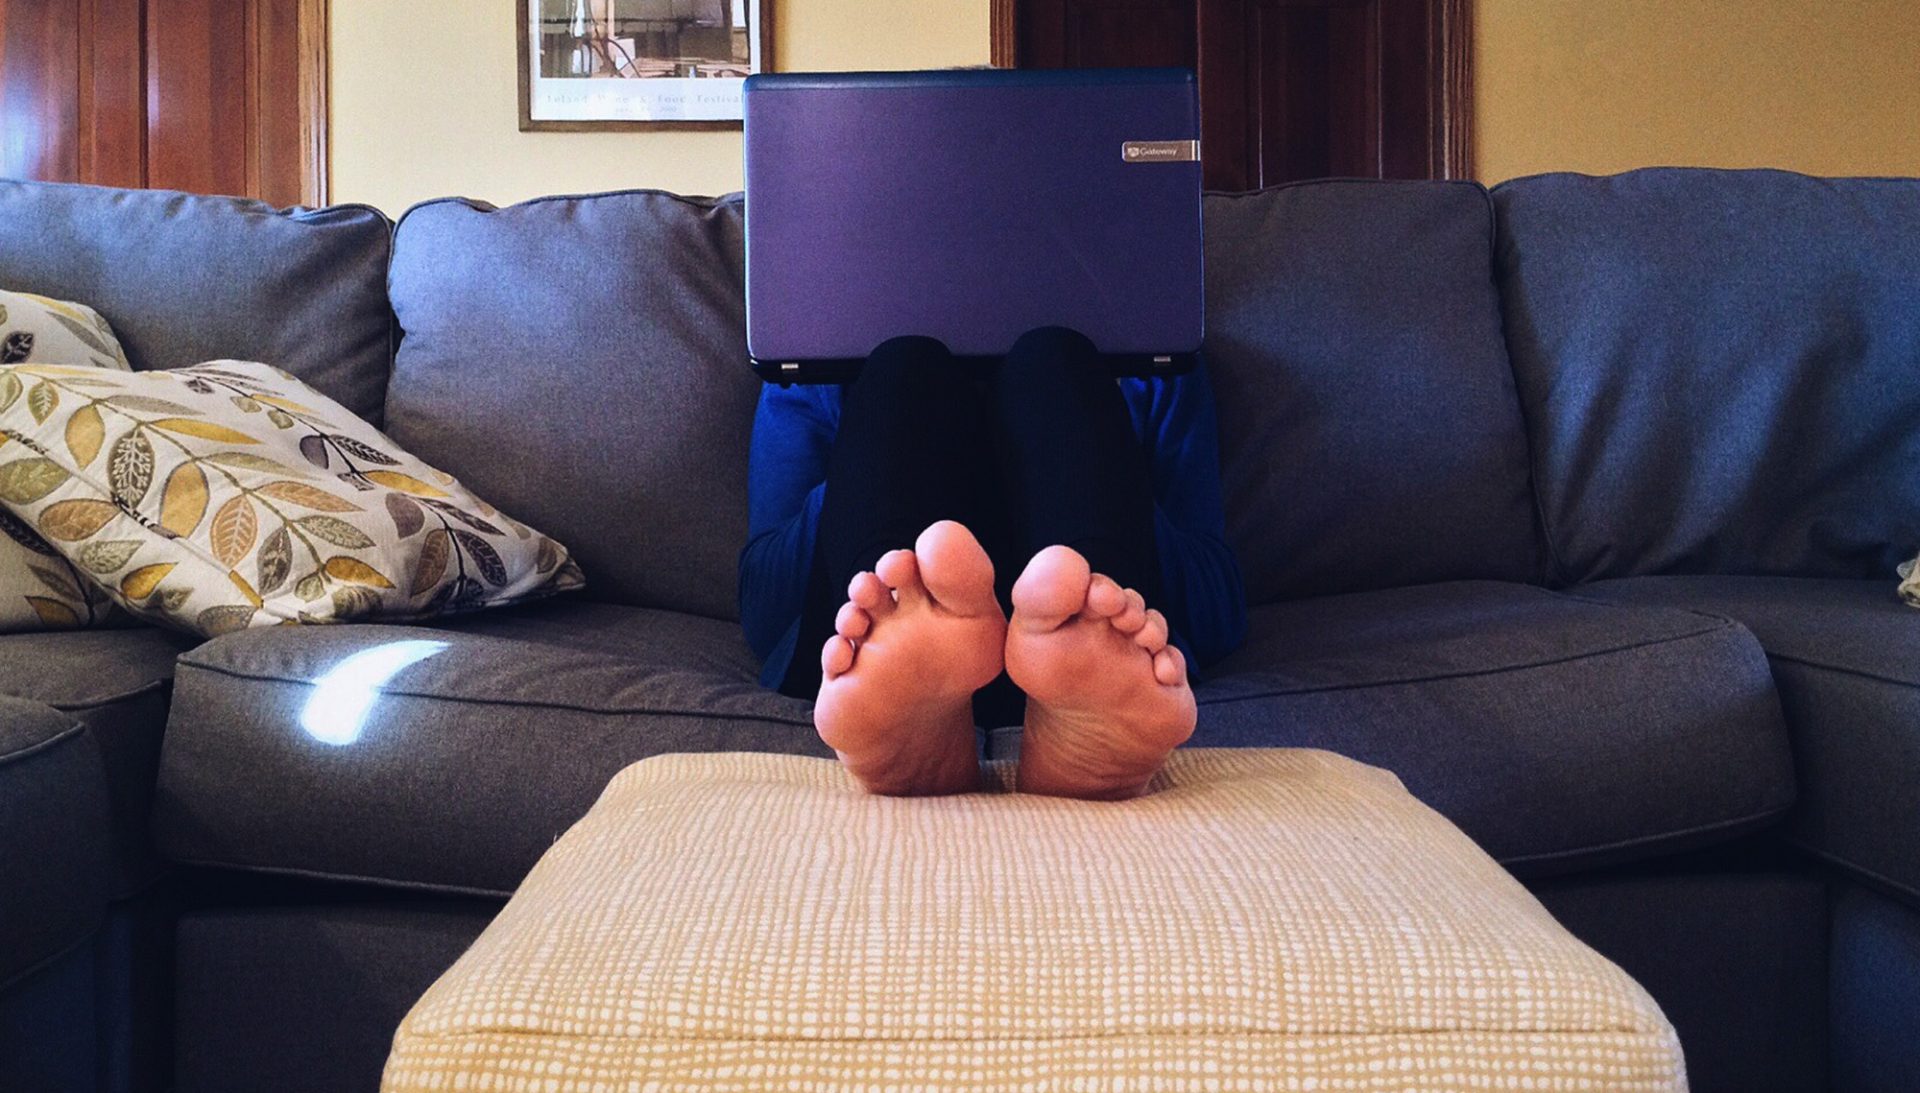 A person working from home on their couch